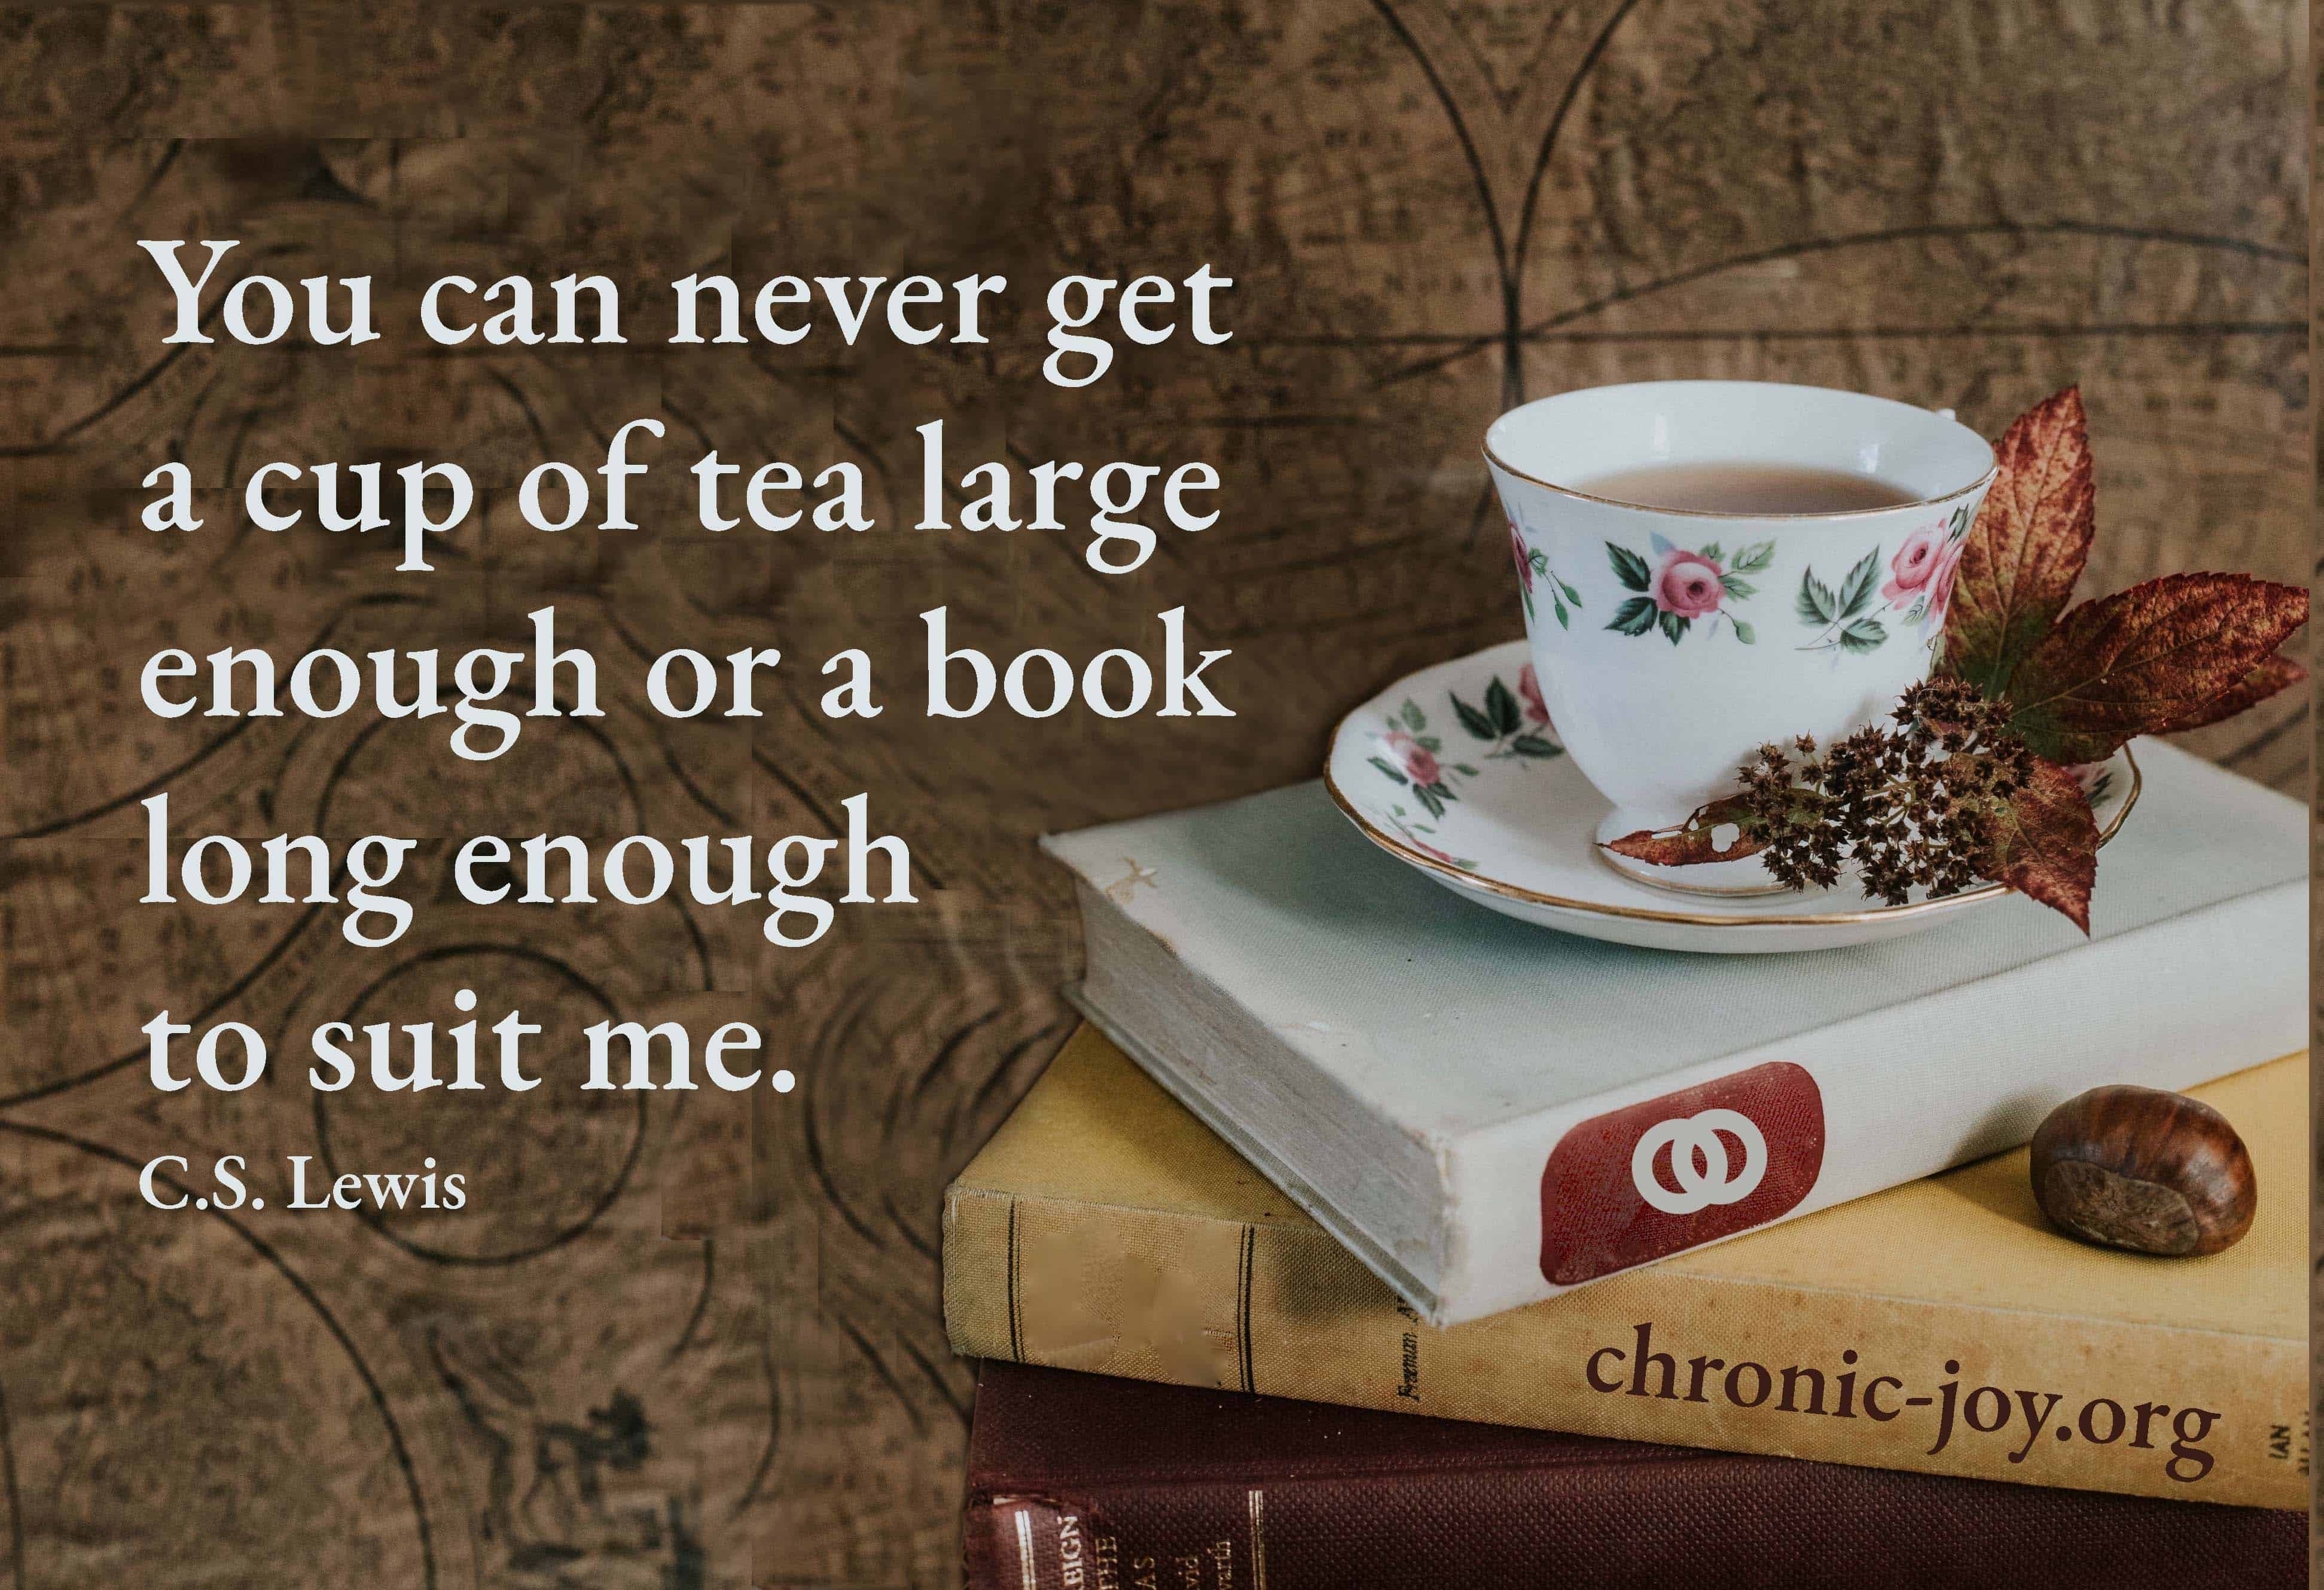 I can never get a cup of tea large enough or a book long enough to suit me. -C.S. Lewis